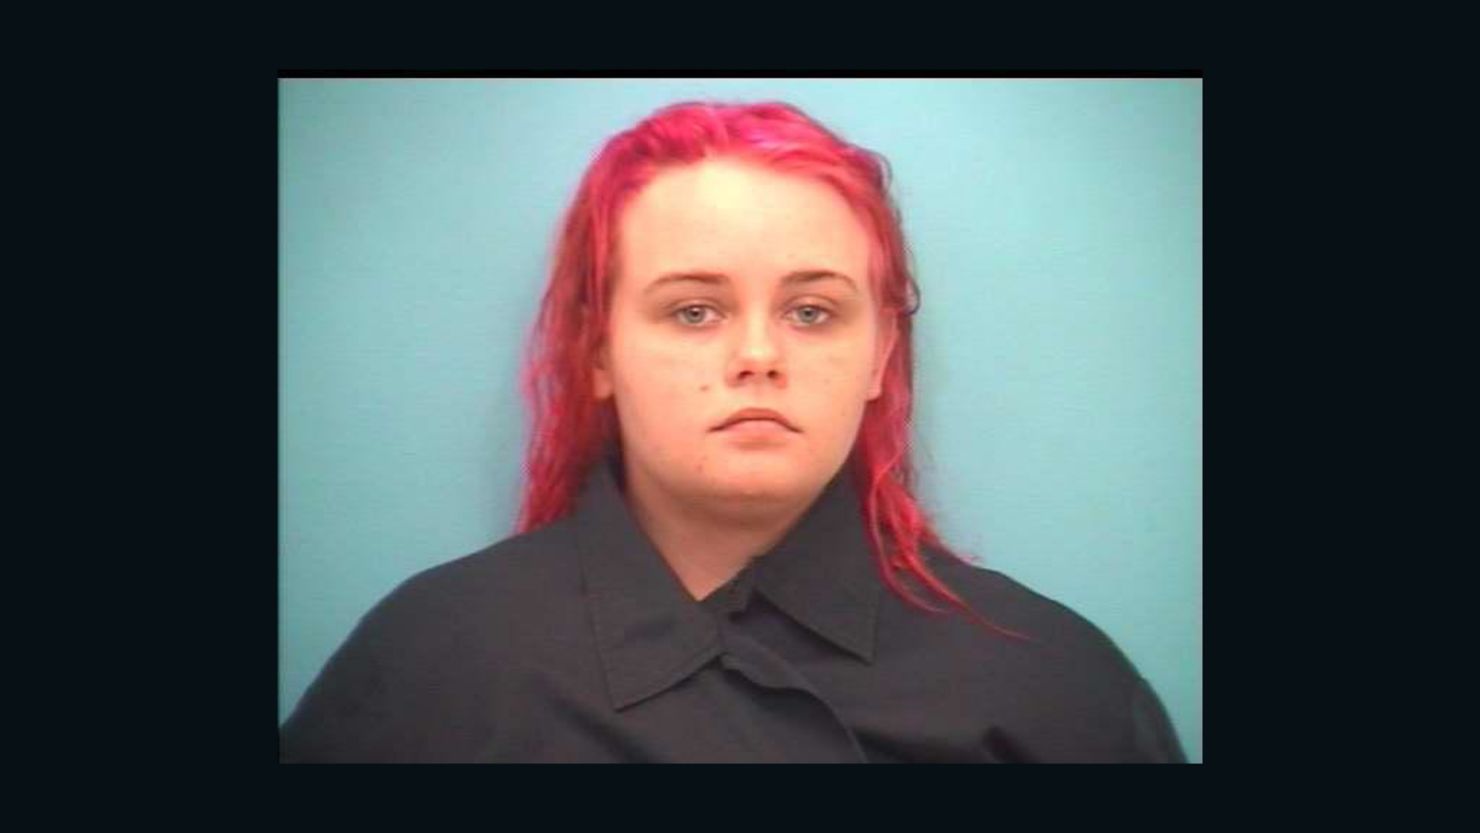 Melissa Ann Ringhardt has been charged with abandoning or endangering a child, a felony. 